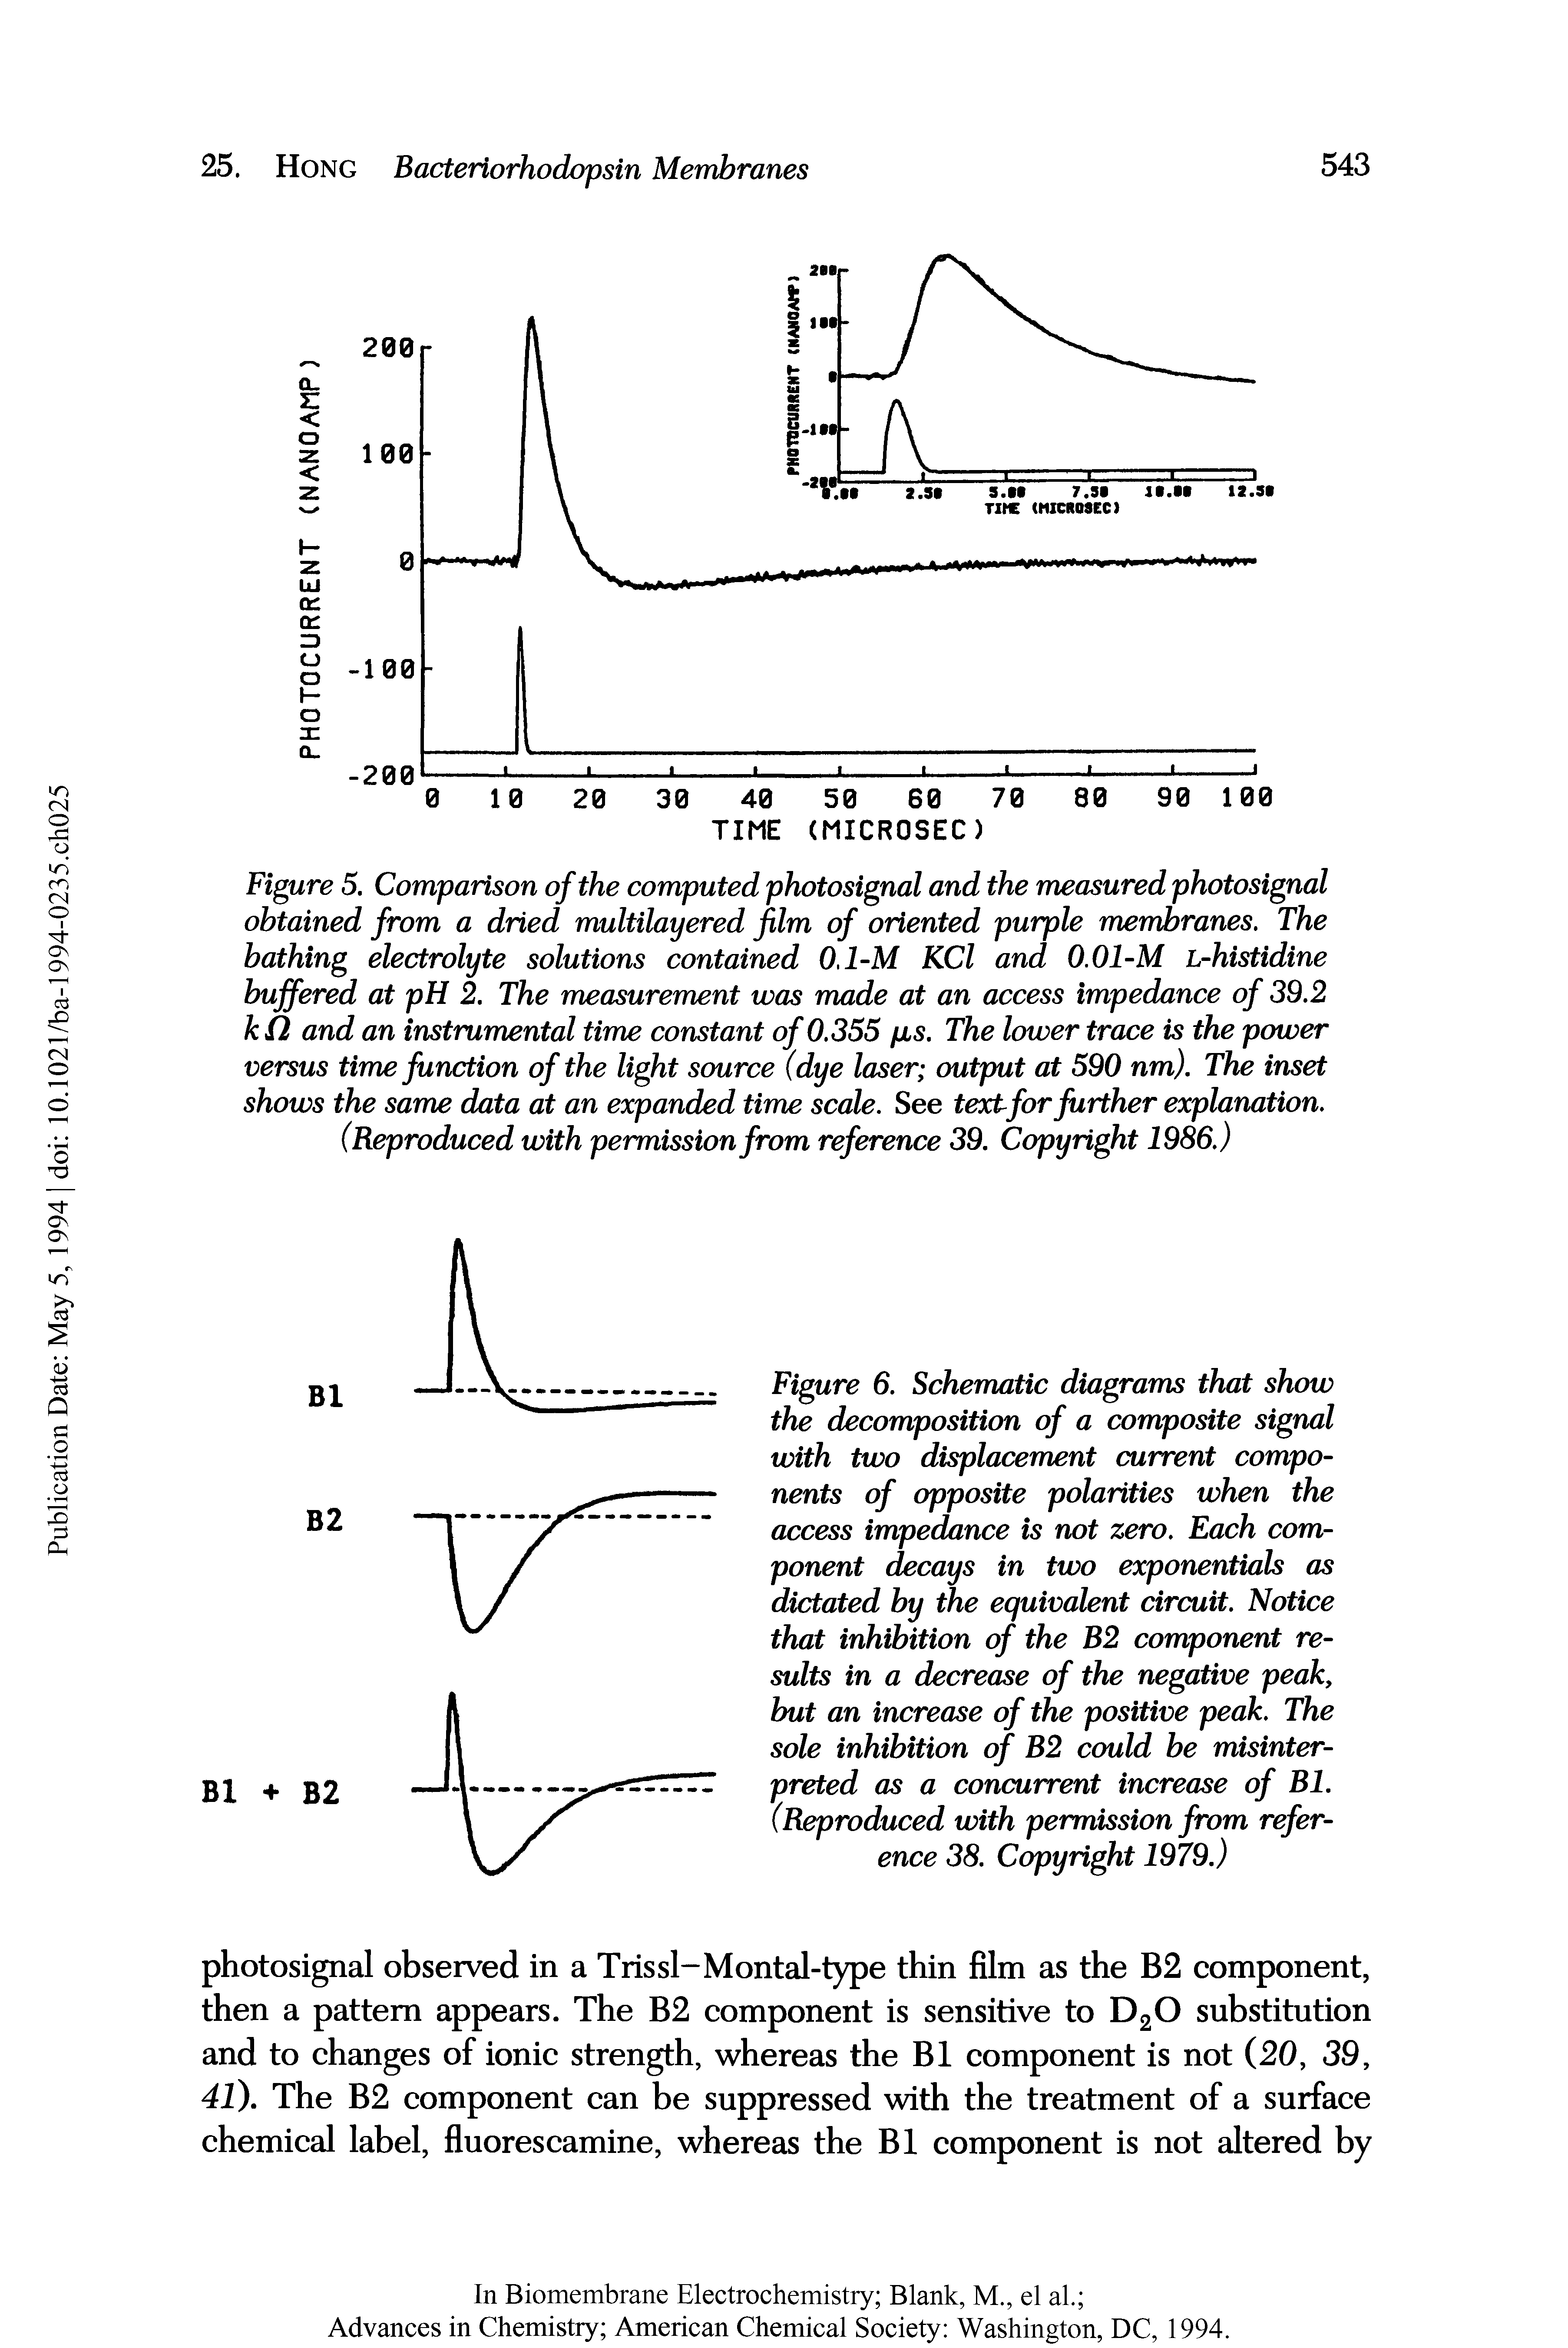 Figure 5. Comparison of the computed photosignal and the measured photosignal obtained from a dried multilayered film of oriented purple membranes. The bathing electrolyte solutions contained 0,1-M KCl and 0.01-M L-histidine buffered at pH 2. The measurement was made at an access impedance of 39.2 kil and an instrumental time constant of0.355 fis. The lower trace is the power versus time function of the light source (dye laser output at 590 nm). The inset shows the same data at an expanded time scale. See text for further explanation.